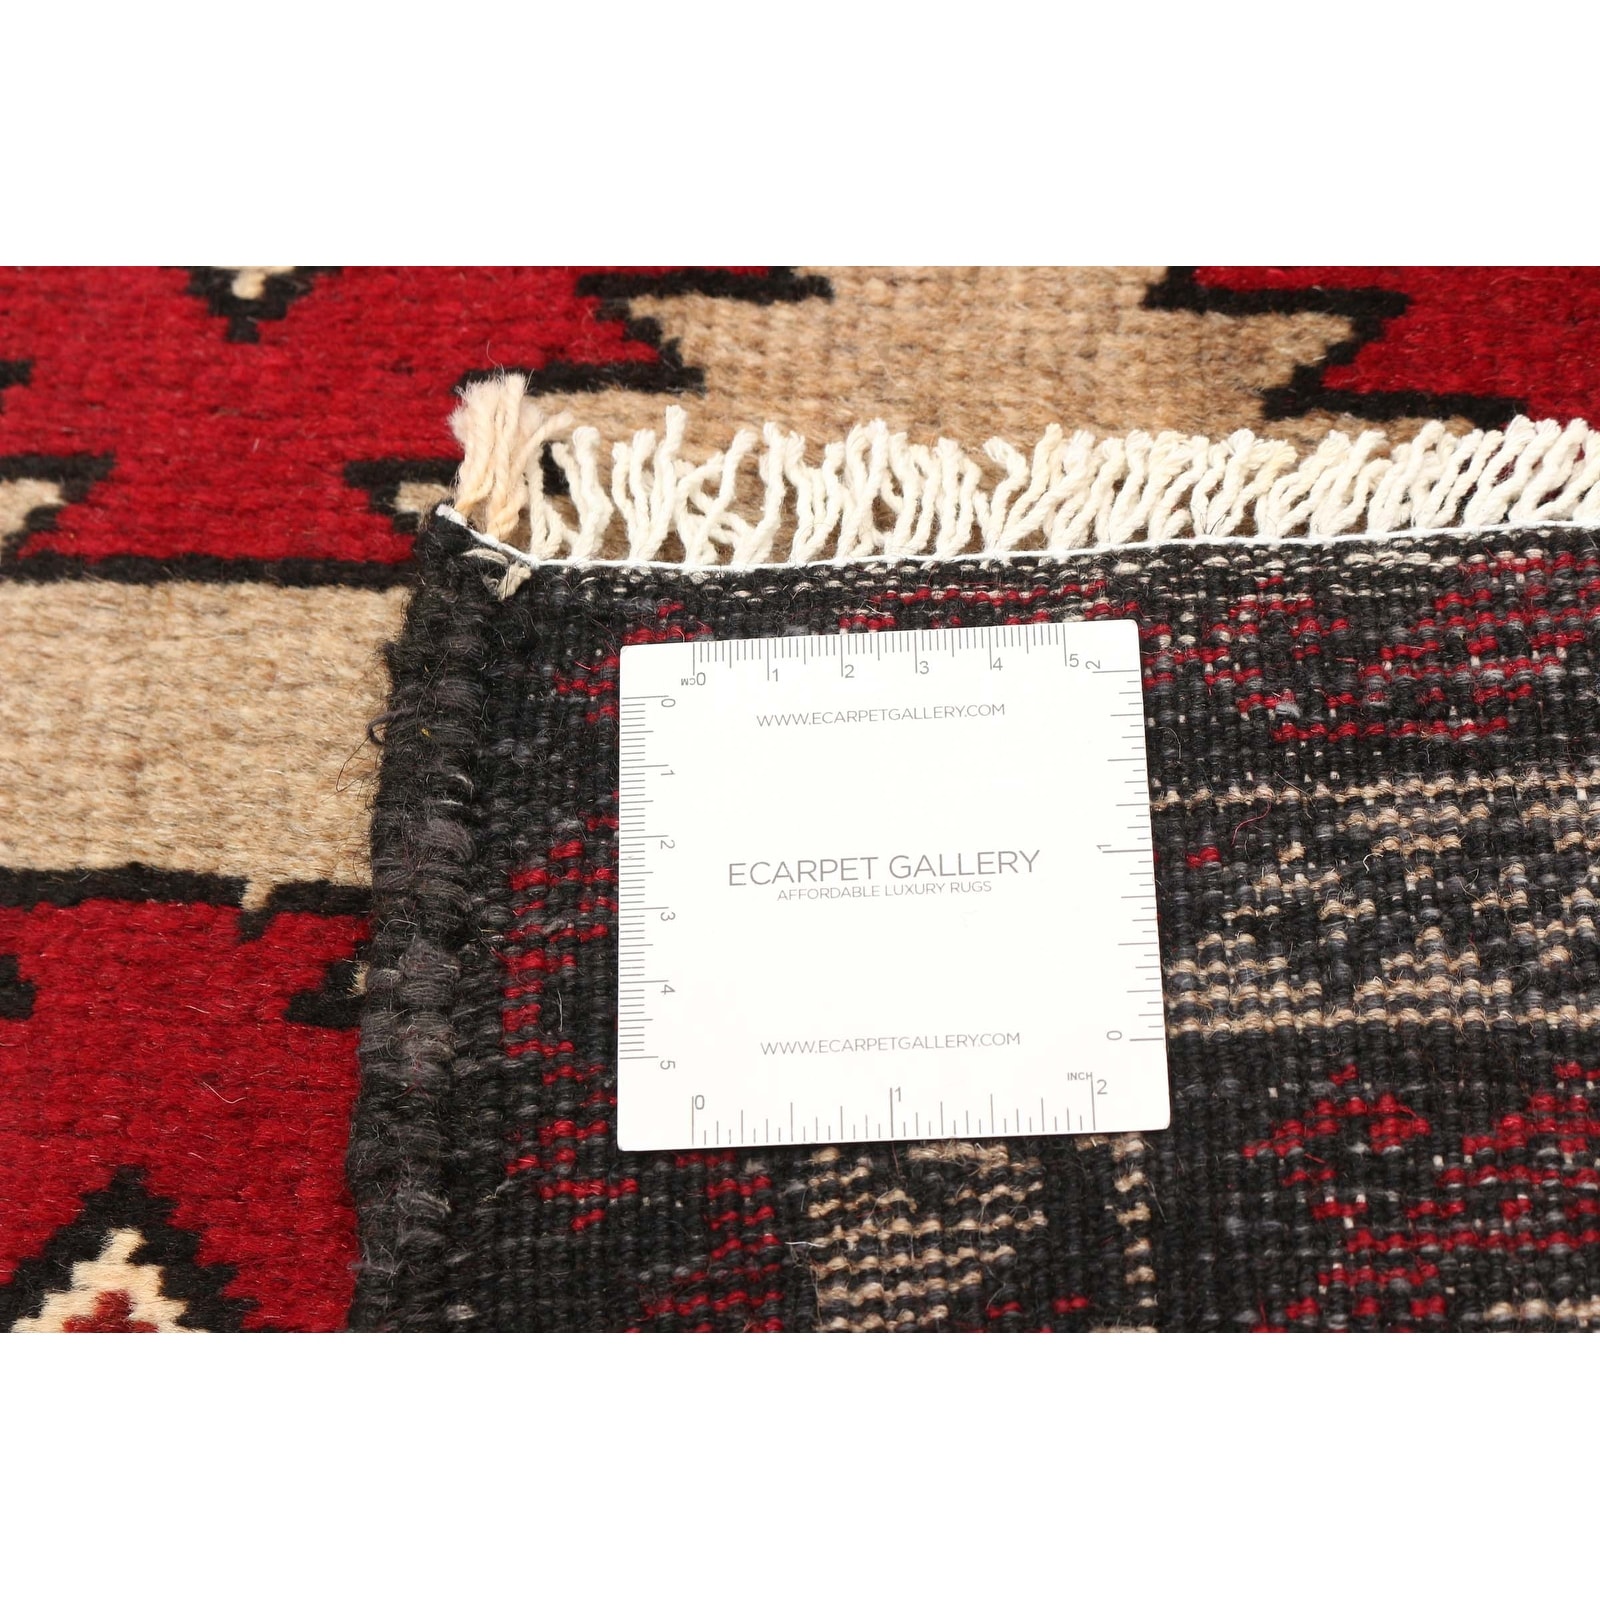 ECARPETGALLERY Hand-Knotted Royal Baluch Tan Wool Rug - 3'4 x 5'7